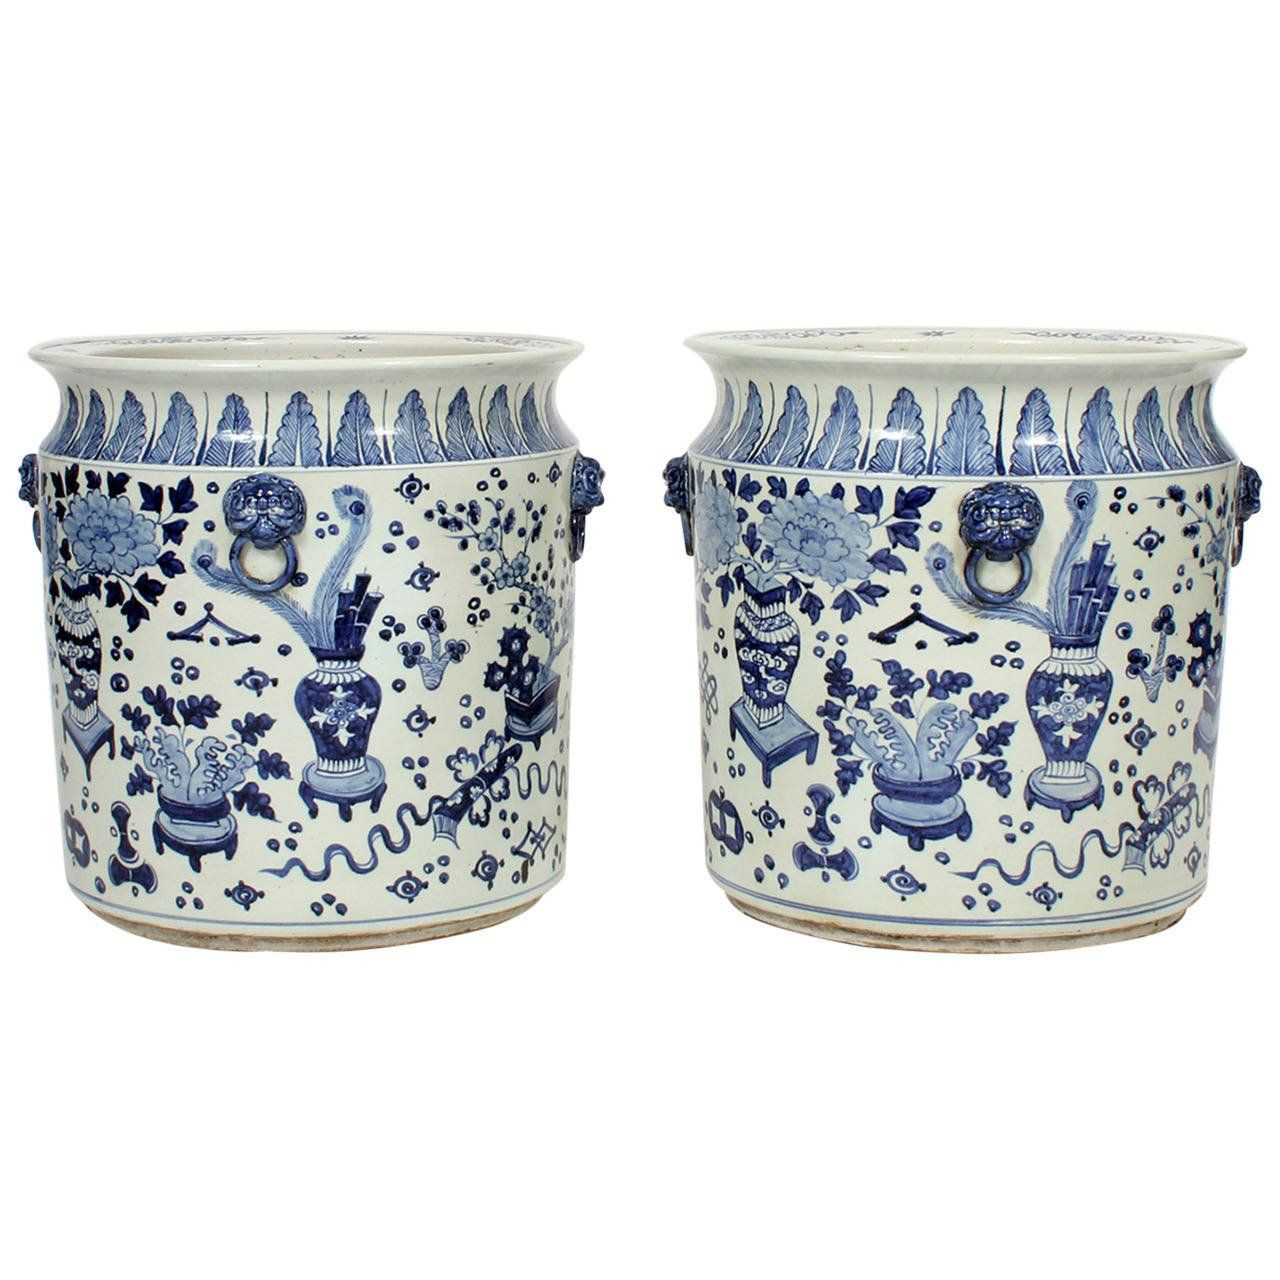 andrea by sadek vase of awesome blue and white chinoiserie planter home interior design regarding awesome blue and white chinoiserie planter